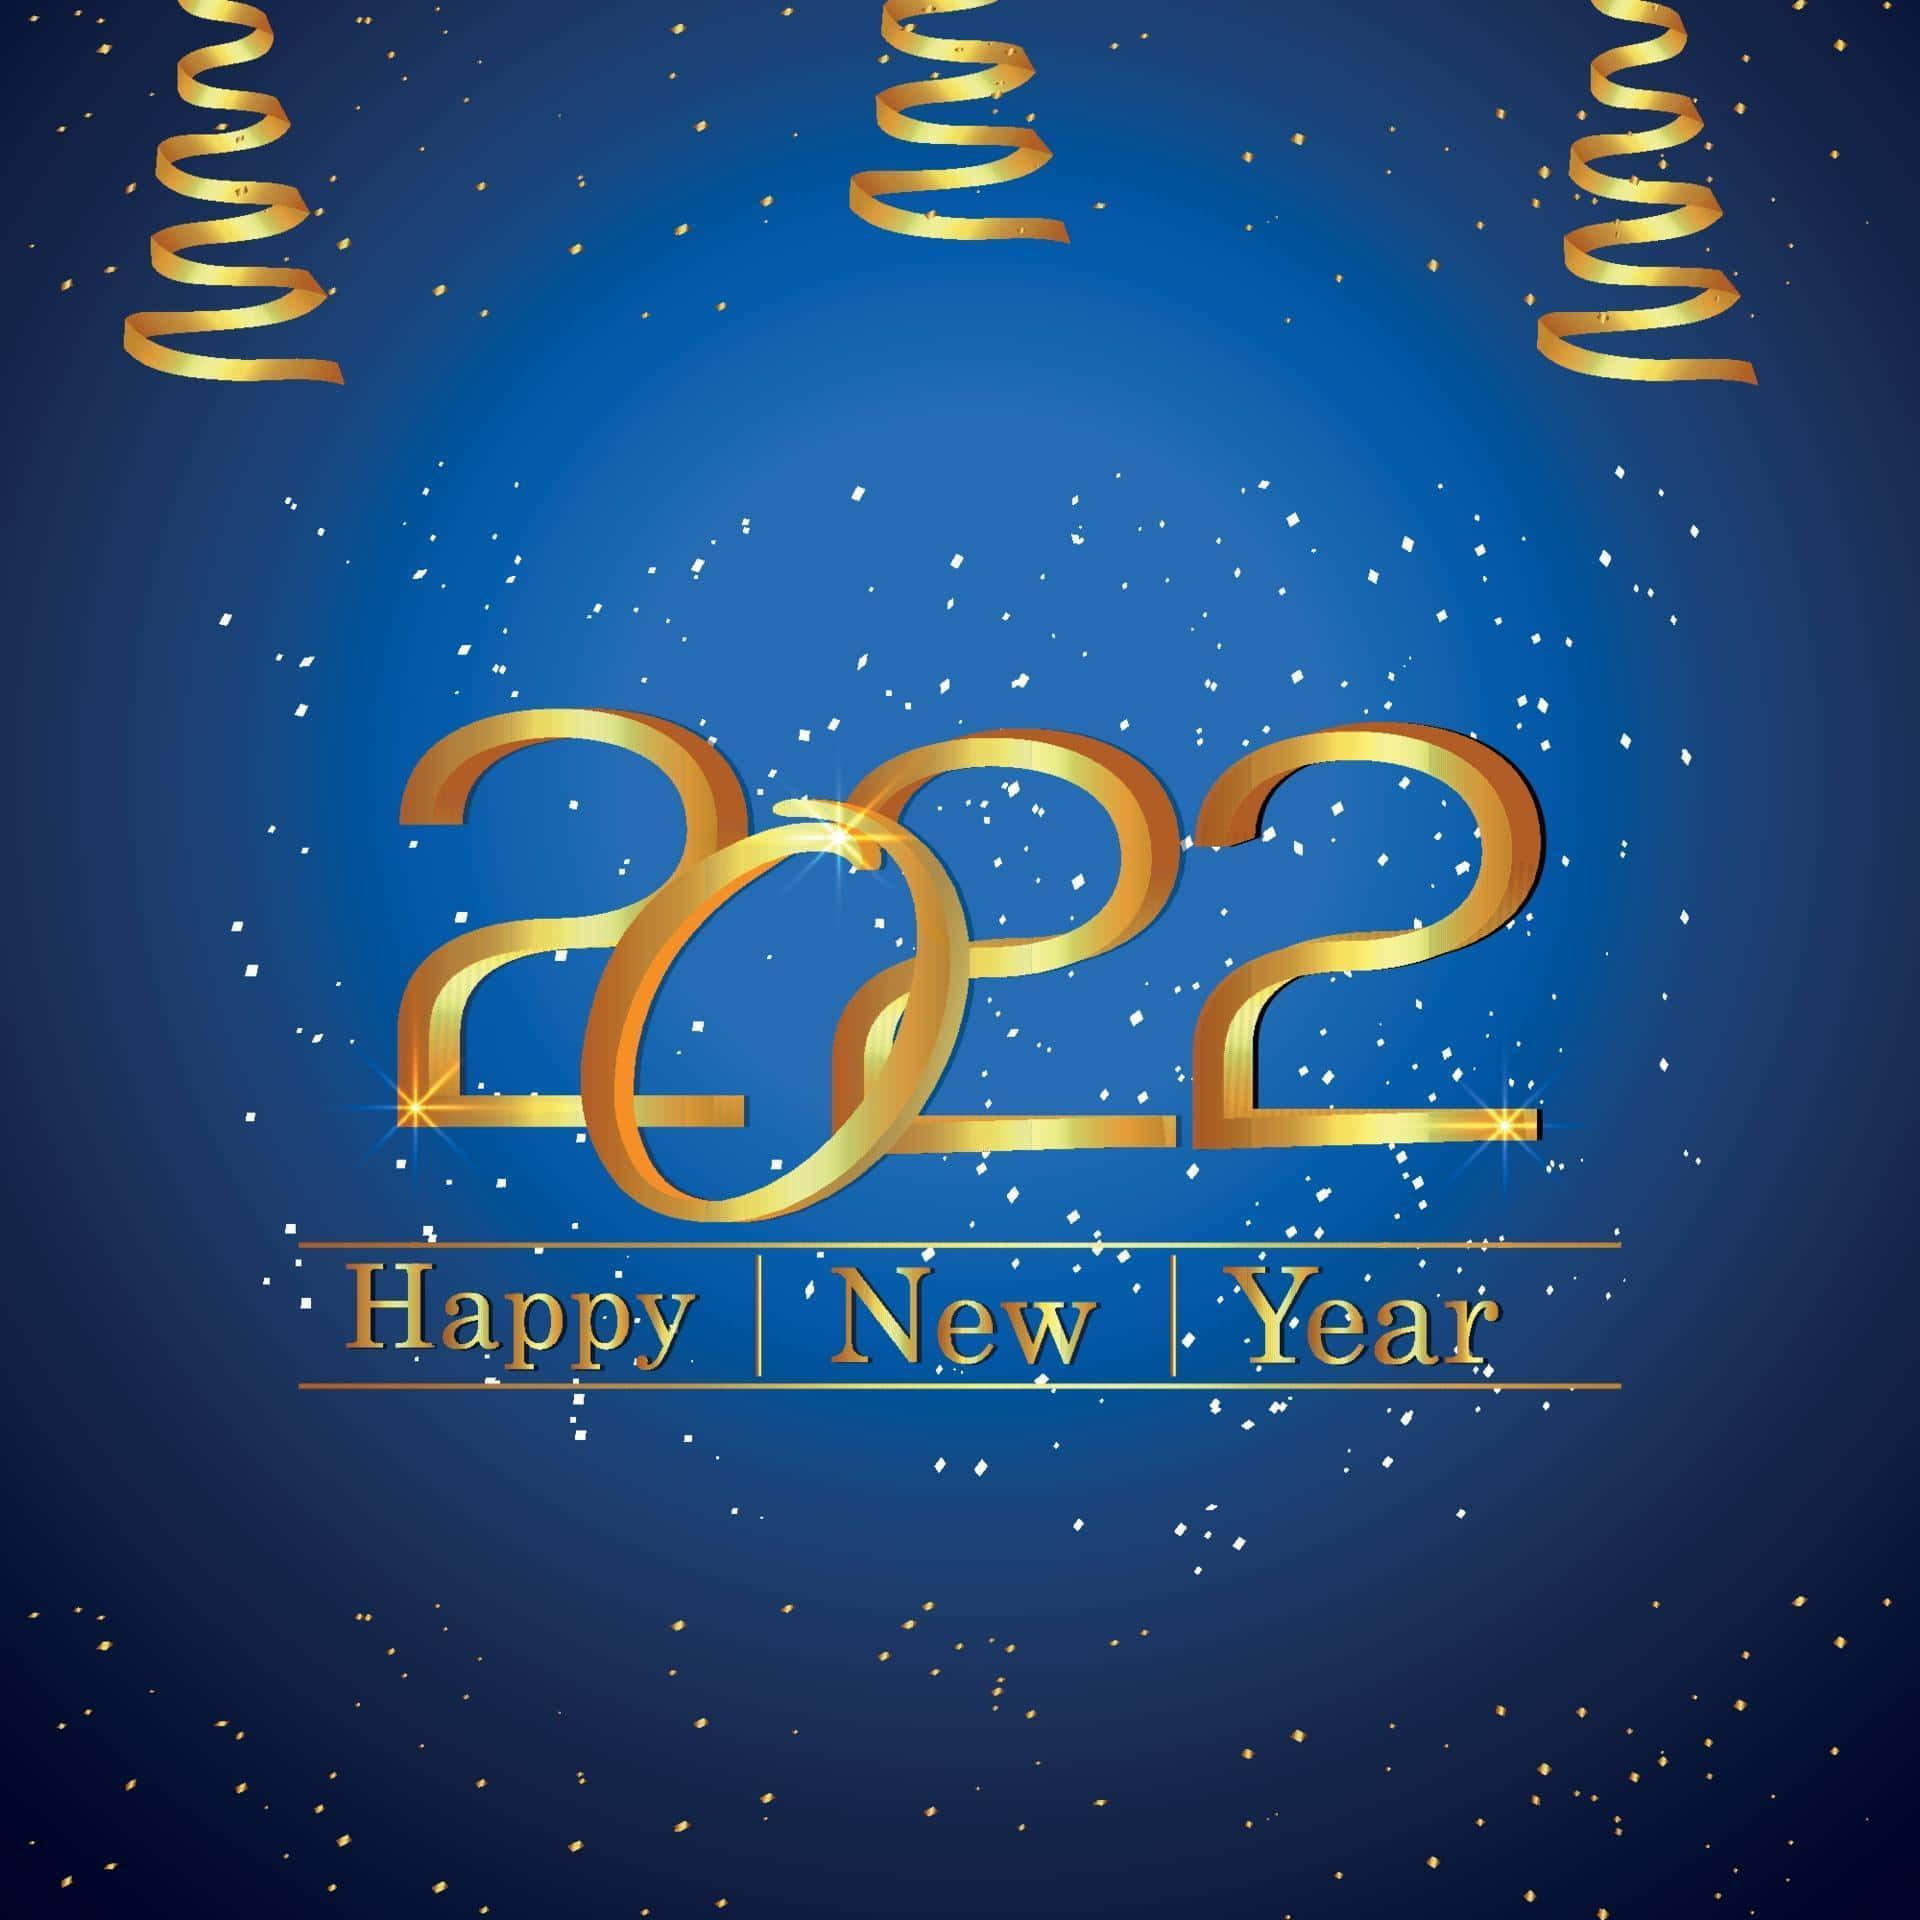 Happy New Year 2020 With Golden Numbers And A Golden Star